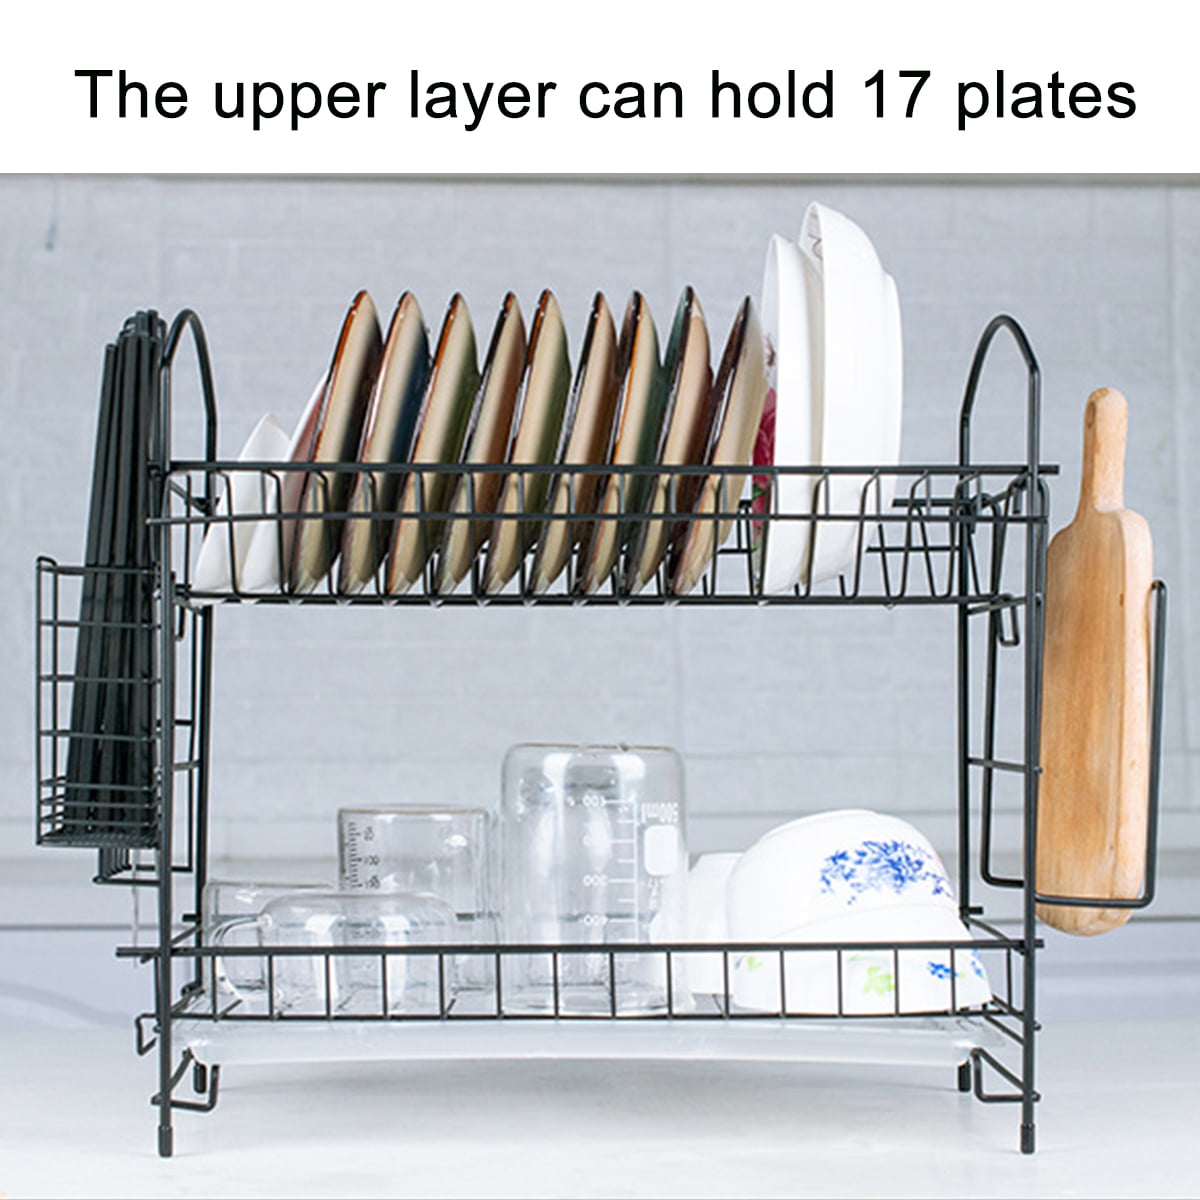 14.04 in.L x 9.95 in. W x 10.34 in. H Pink Standing Metal Kitchen Dish Rack with Pallet